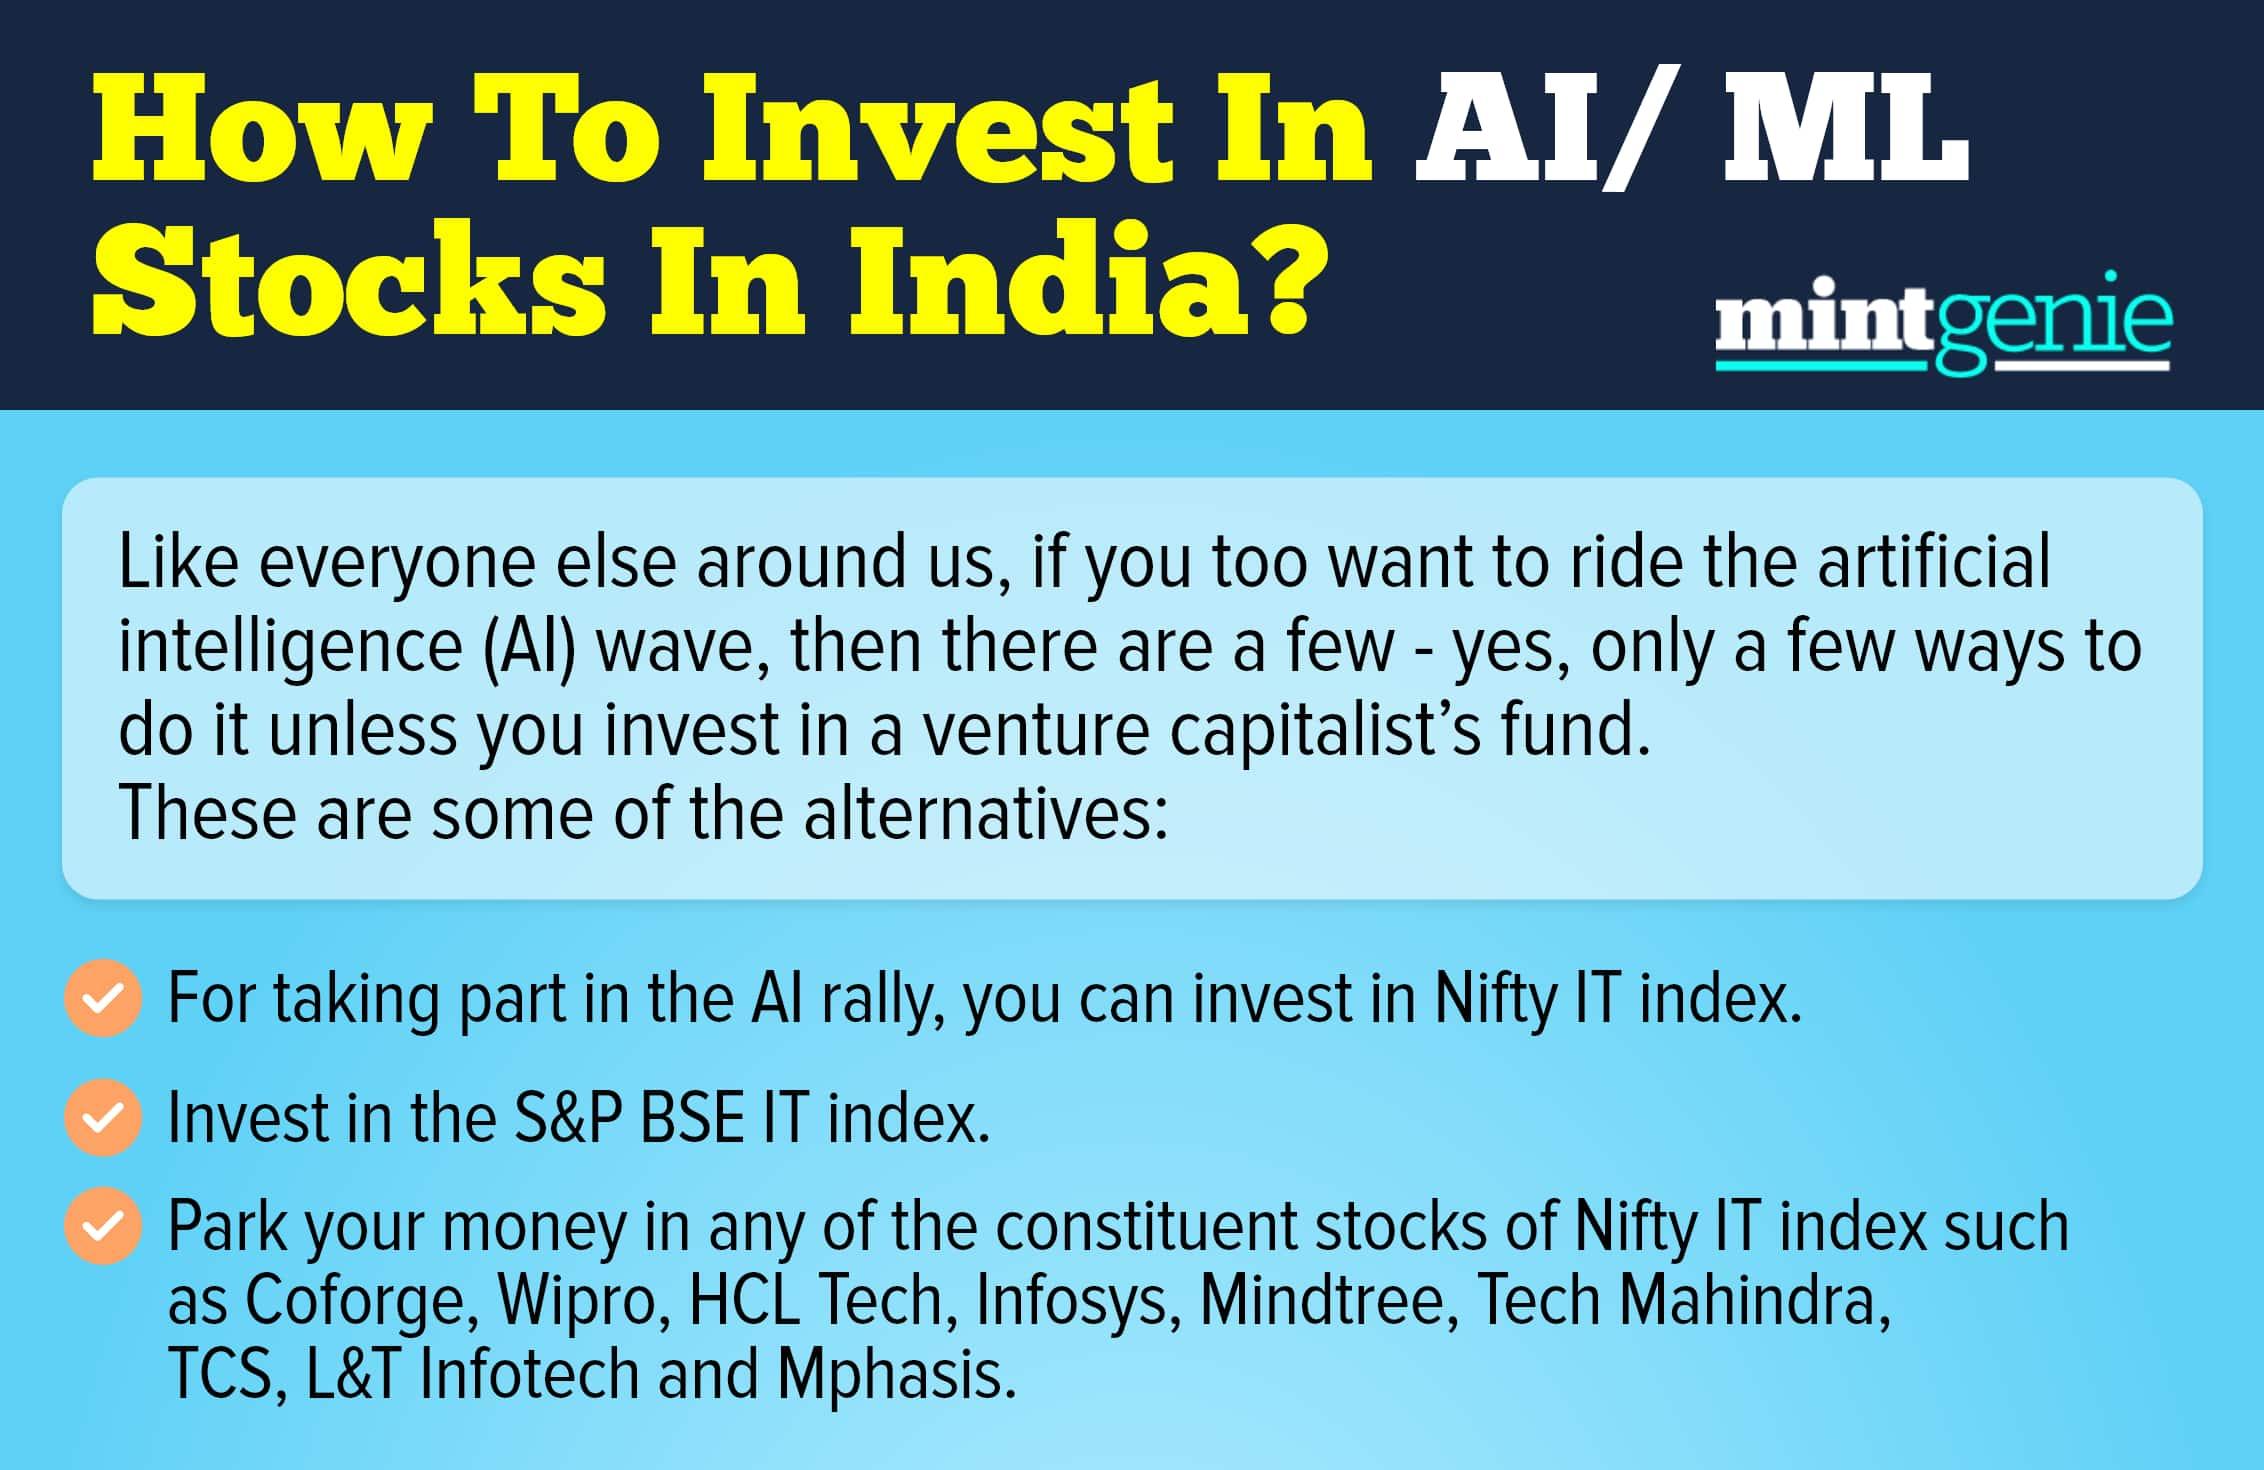 There are not many ways to invest in the artificial intelligence (AI) rally via the stock market.&nbsp;